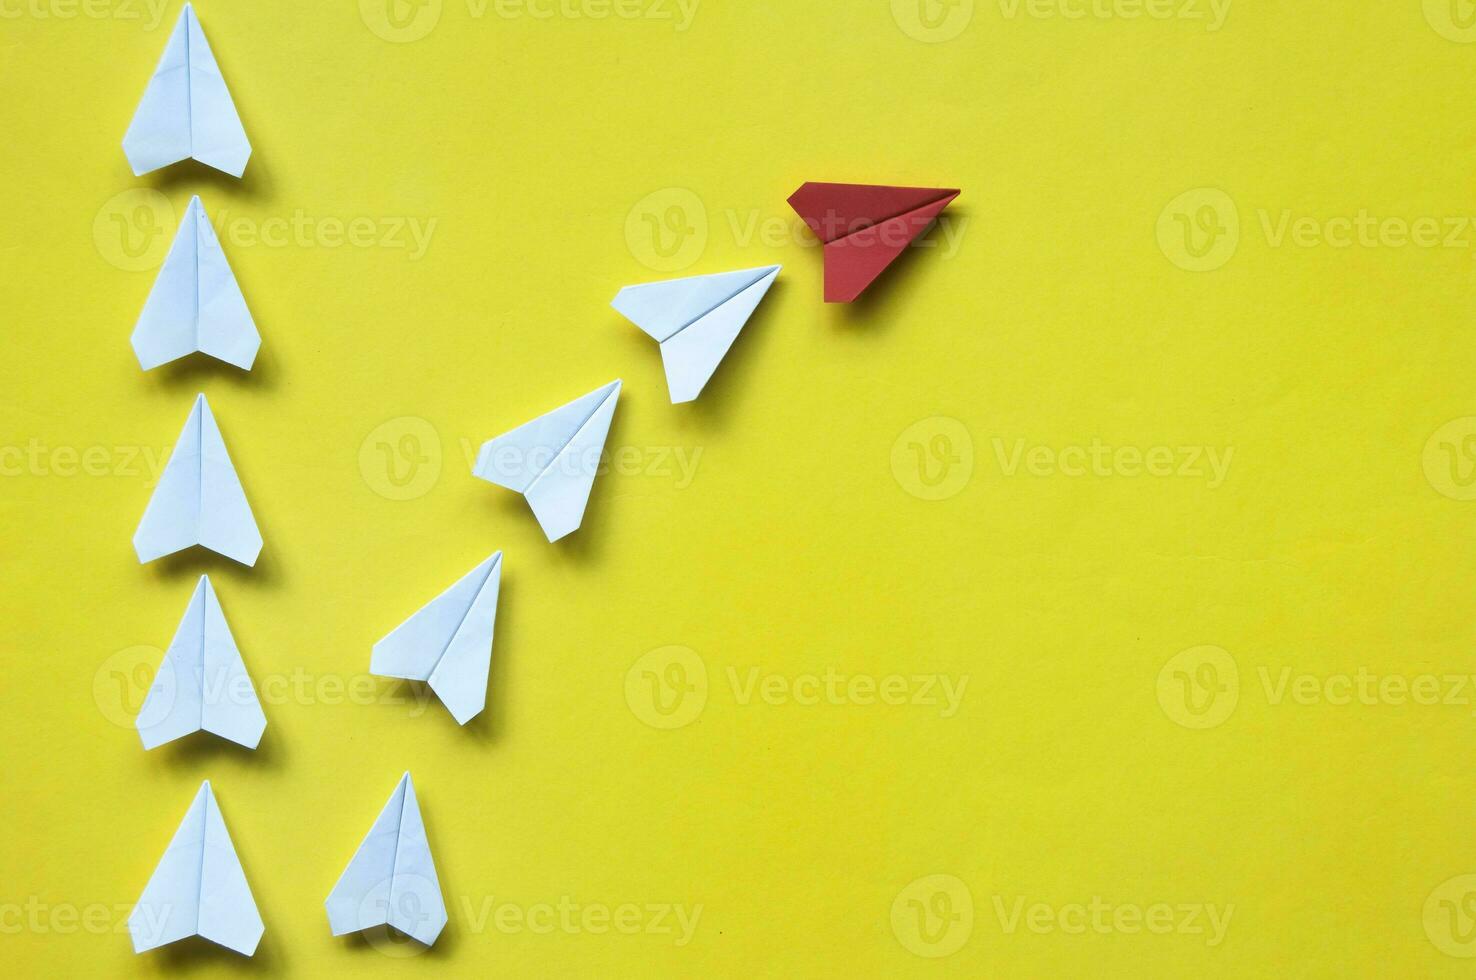 Red paper airplane origami leaving with other white airplanes on yellow background with customizable space for text or ideas. Leadership skills concept and copy space photo